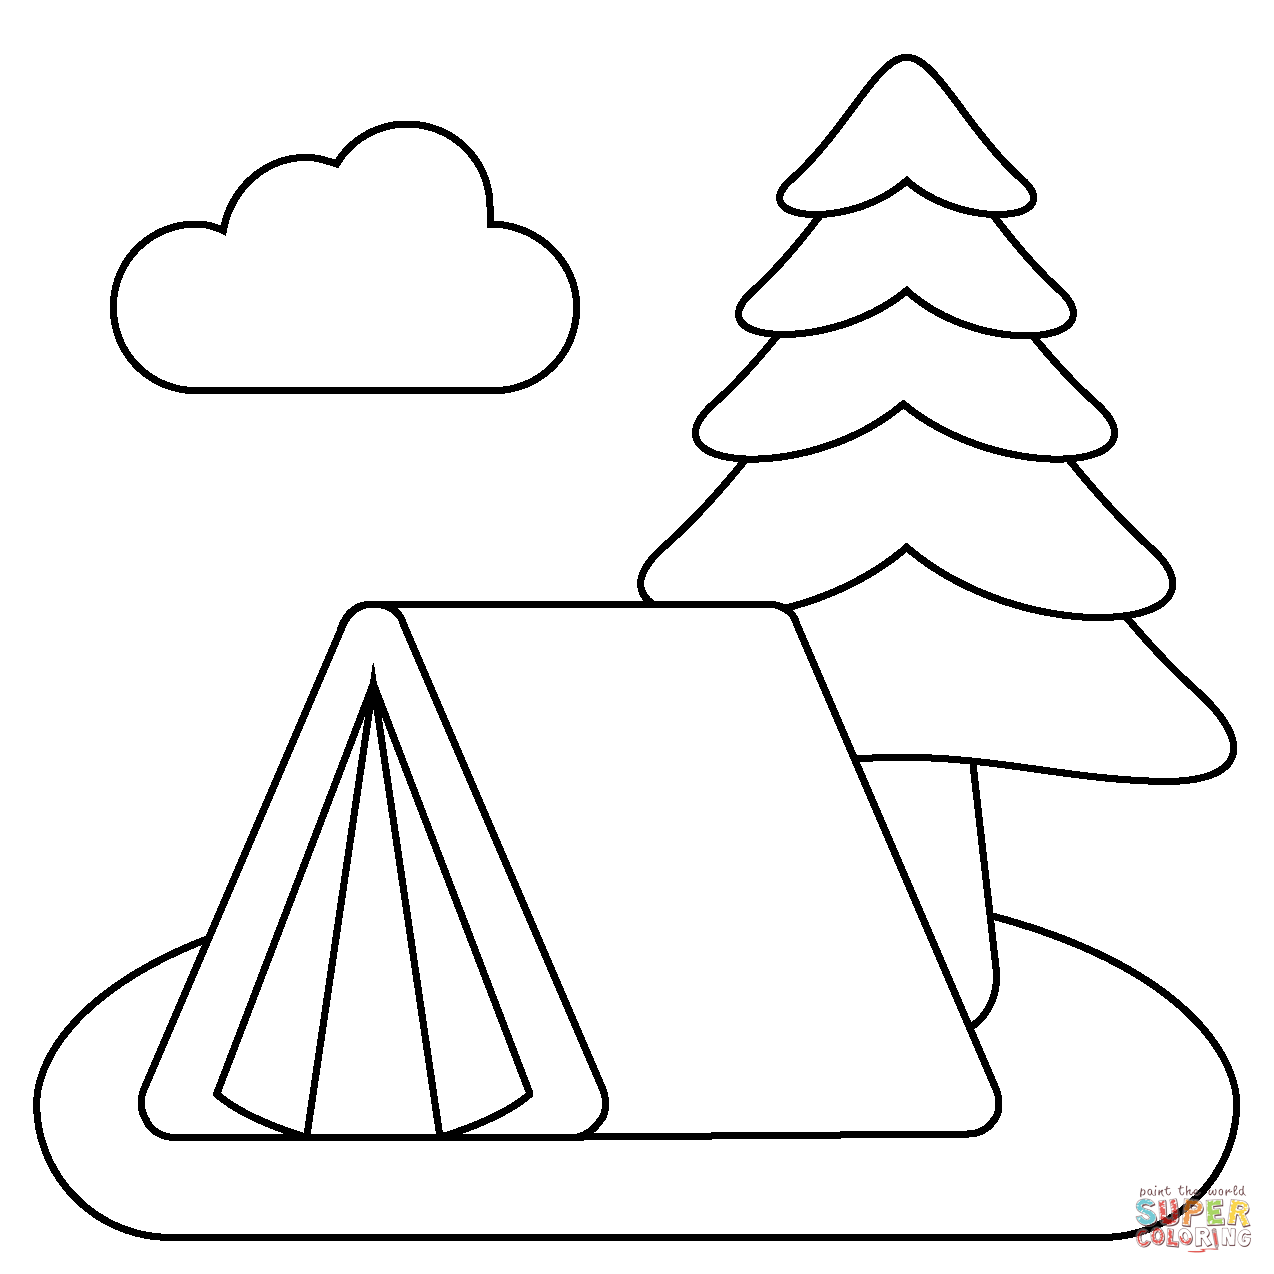 Camping emoji coloring page free printable coloring pages